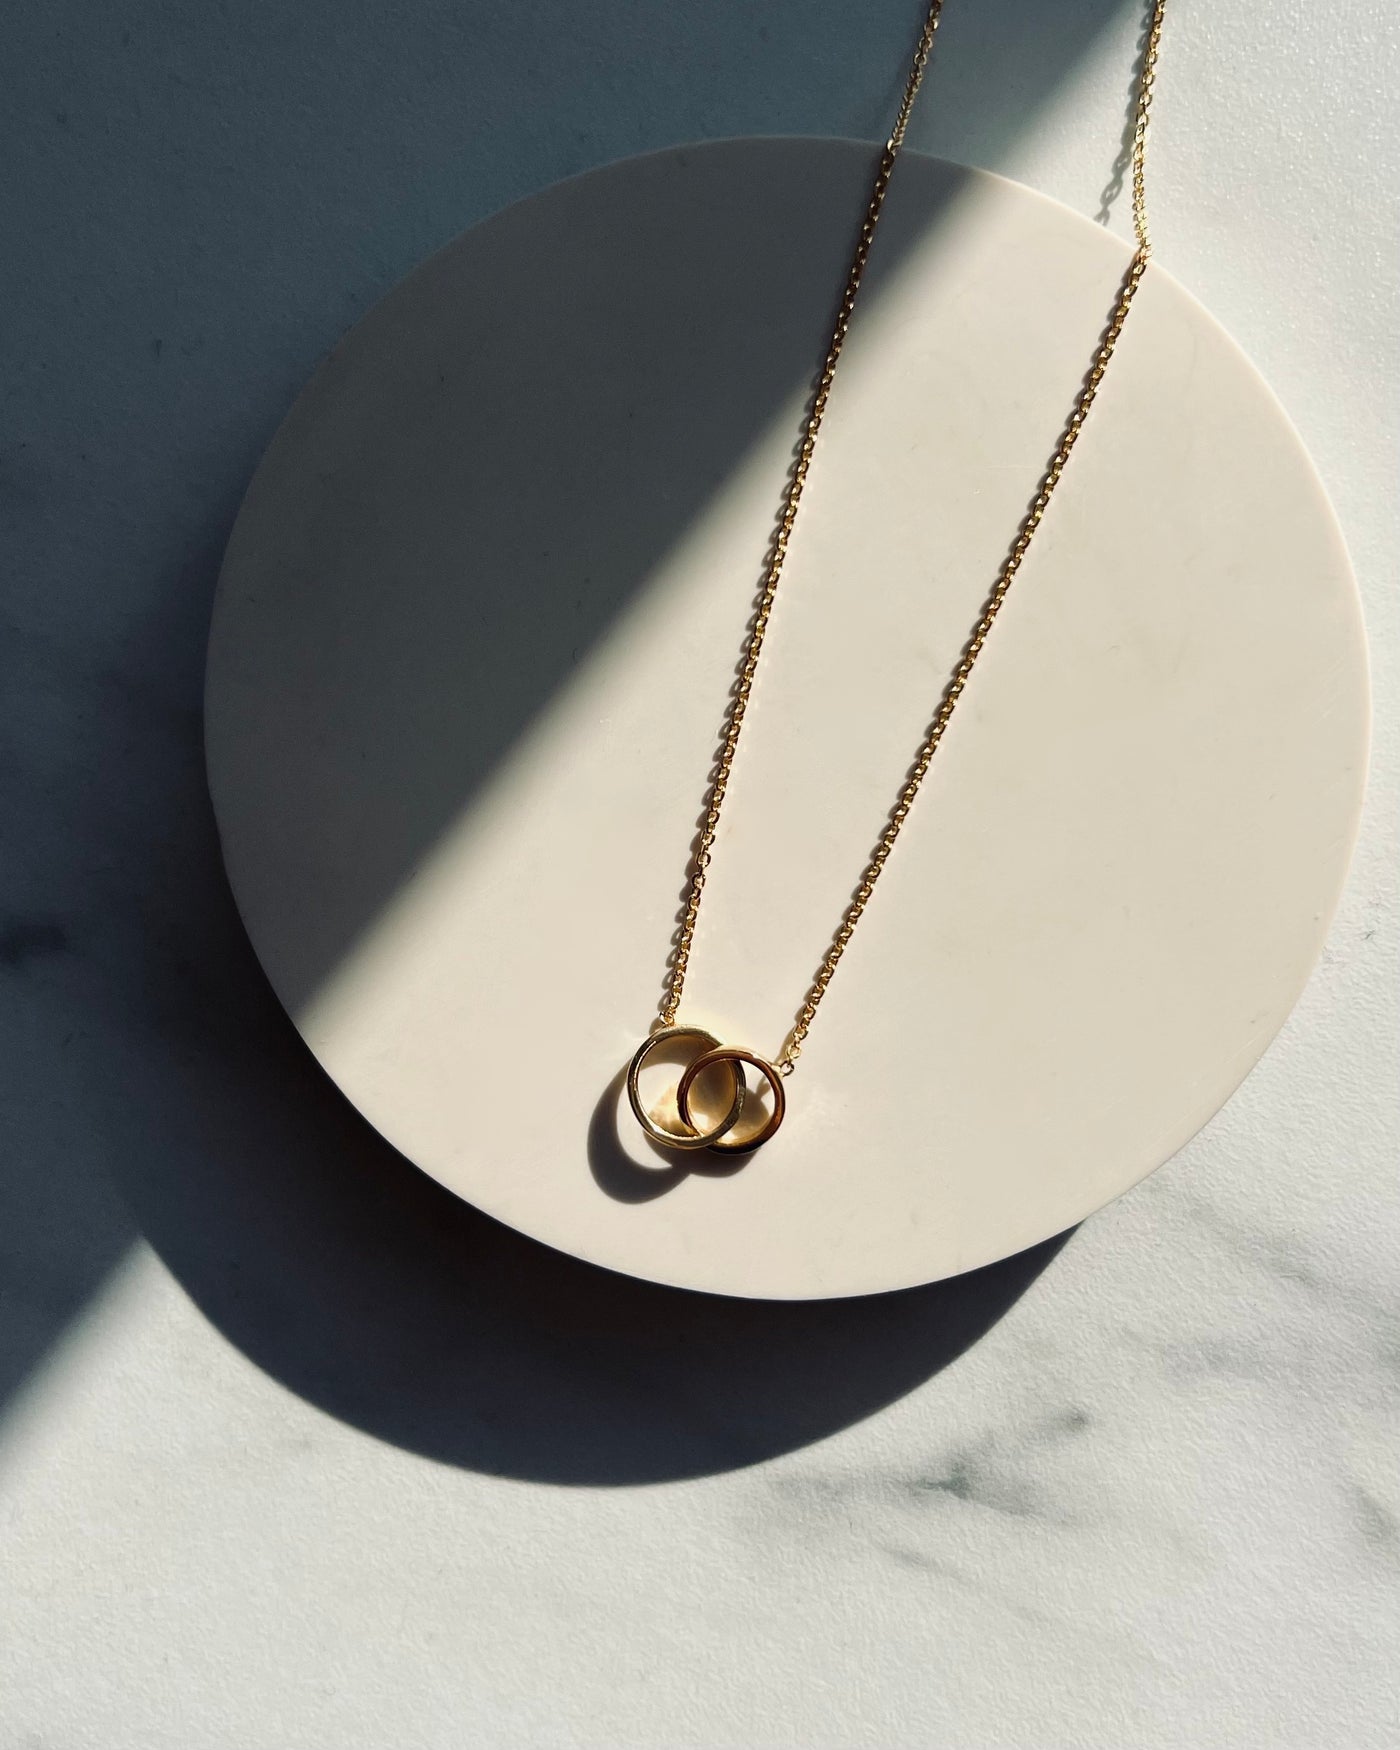 DEAR DARLING BERLIN DOUBLE RING NECKLACE GOLD